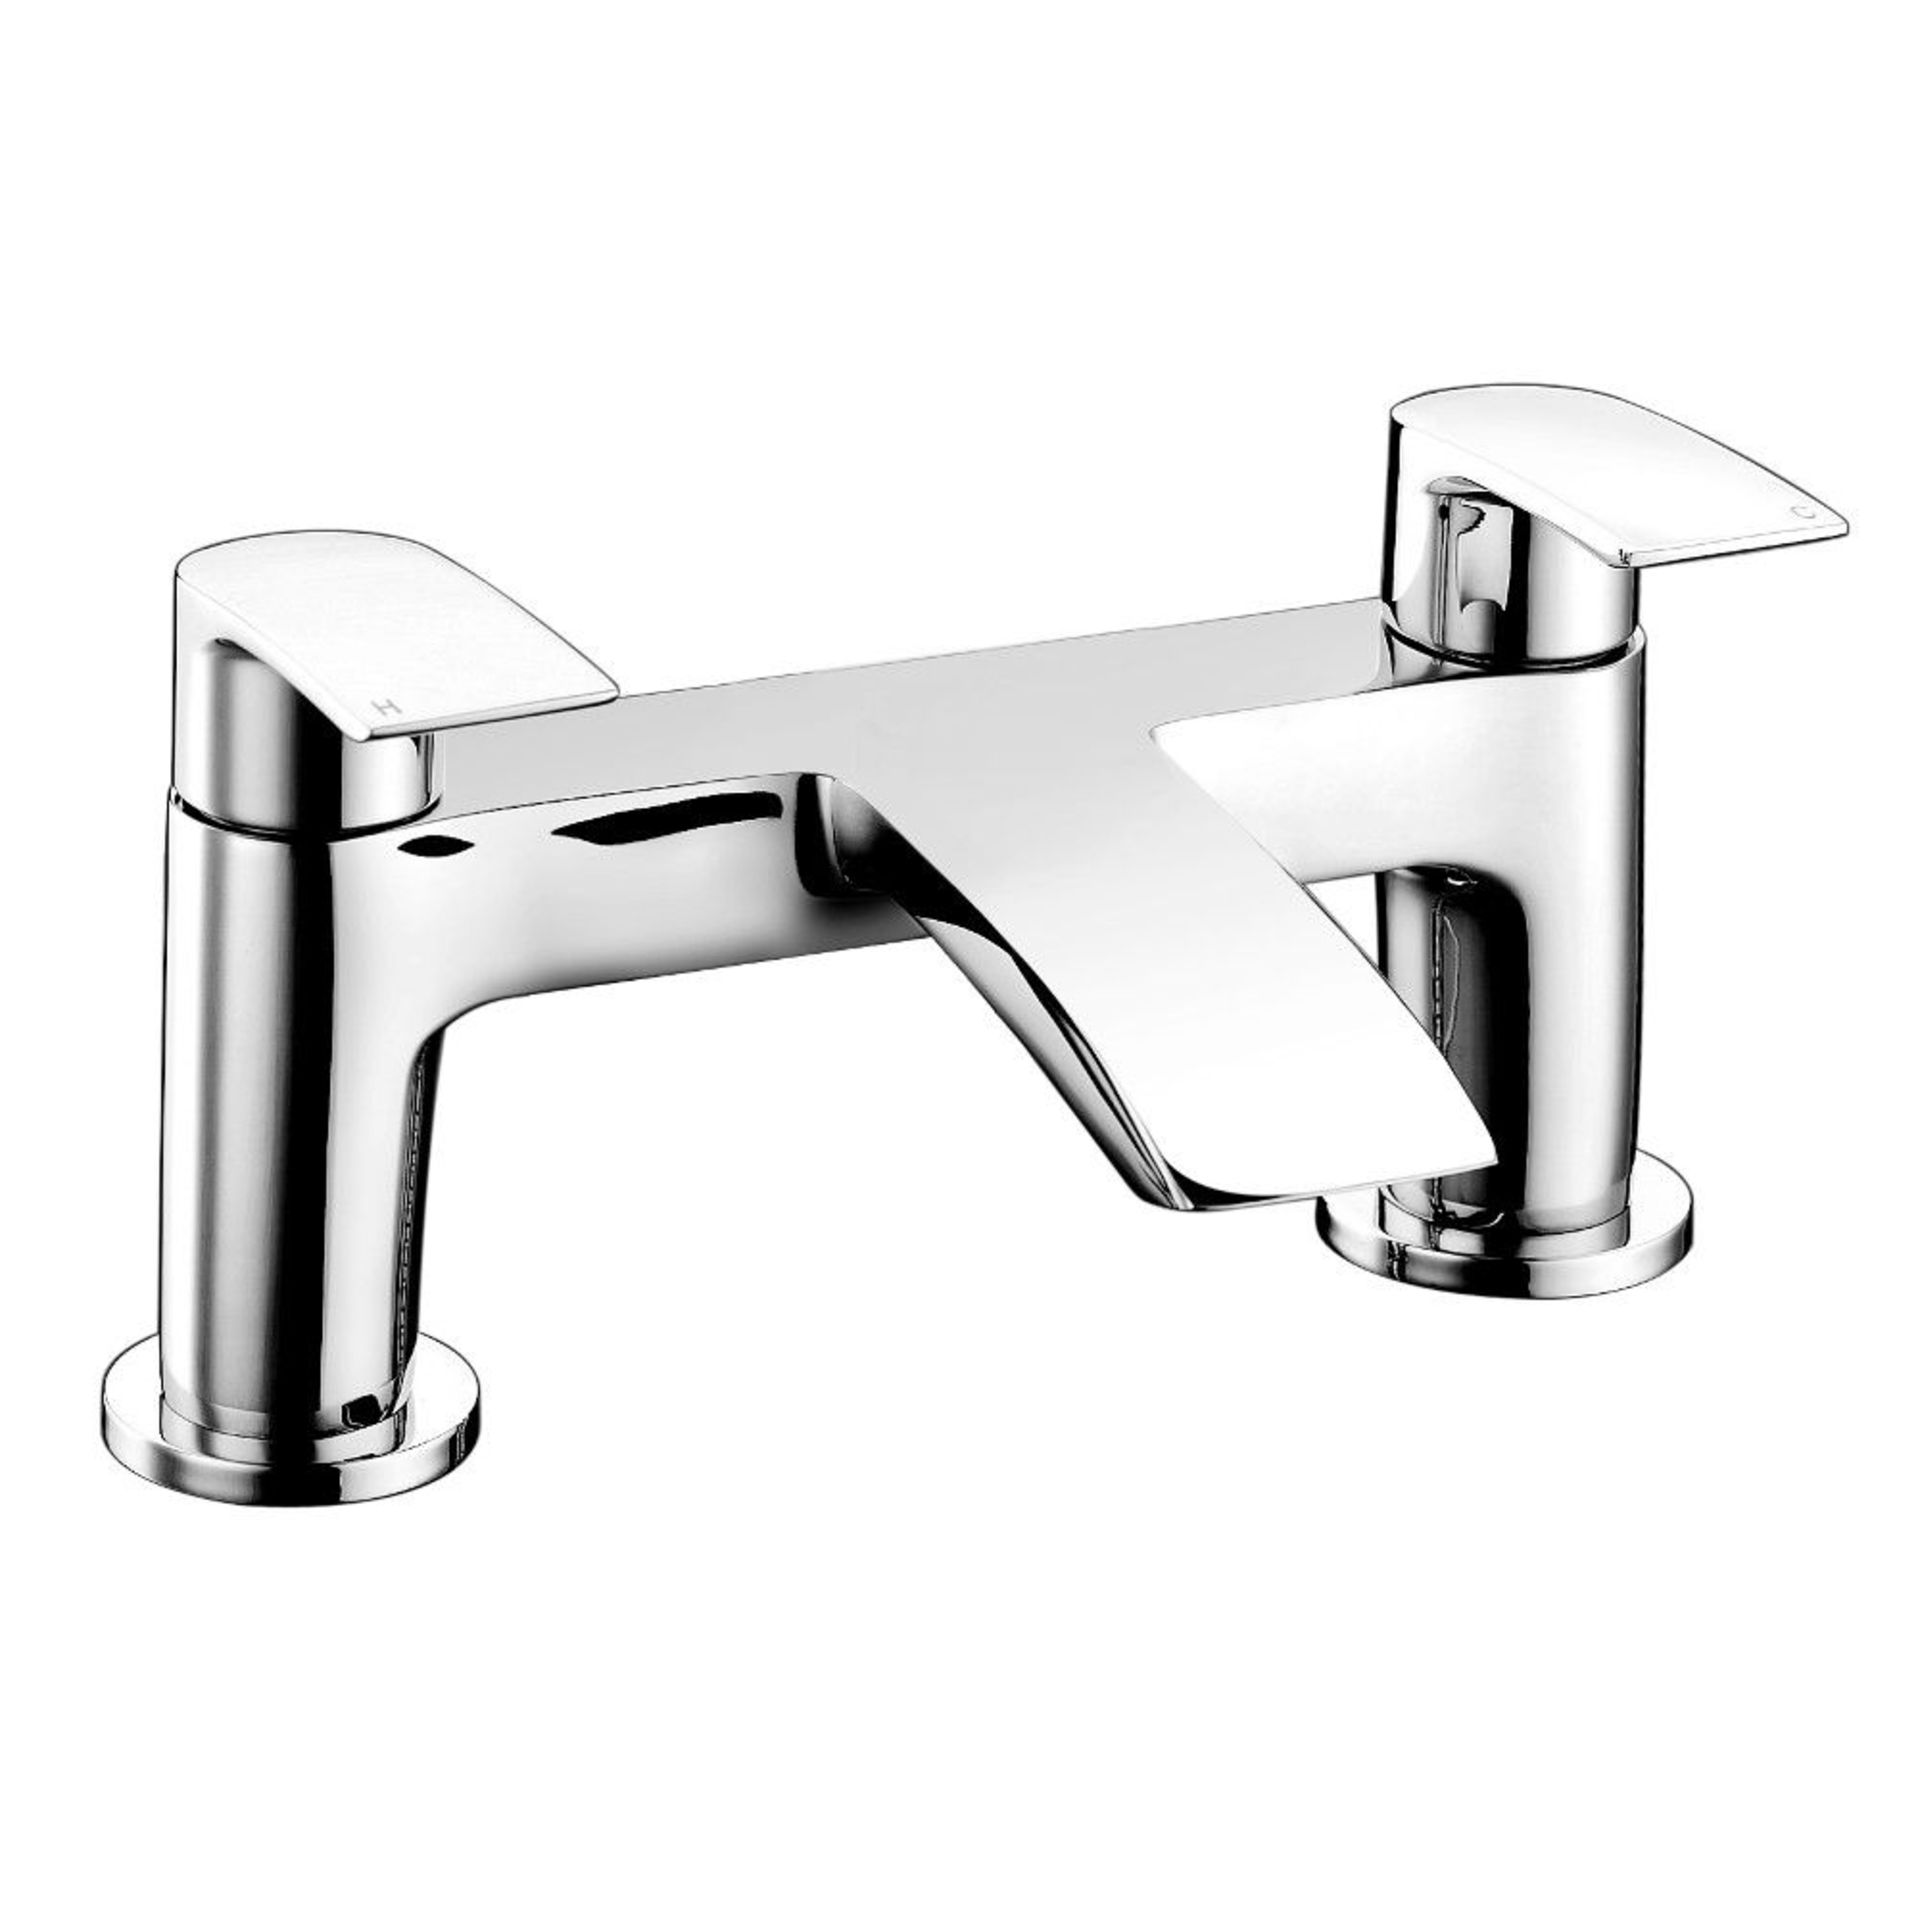 New Hatton Bath Filler Tap. RRP £105.10. The Hatton bath filler tap with flat head levers will add a - Image 2 of 2